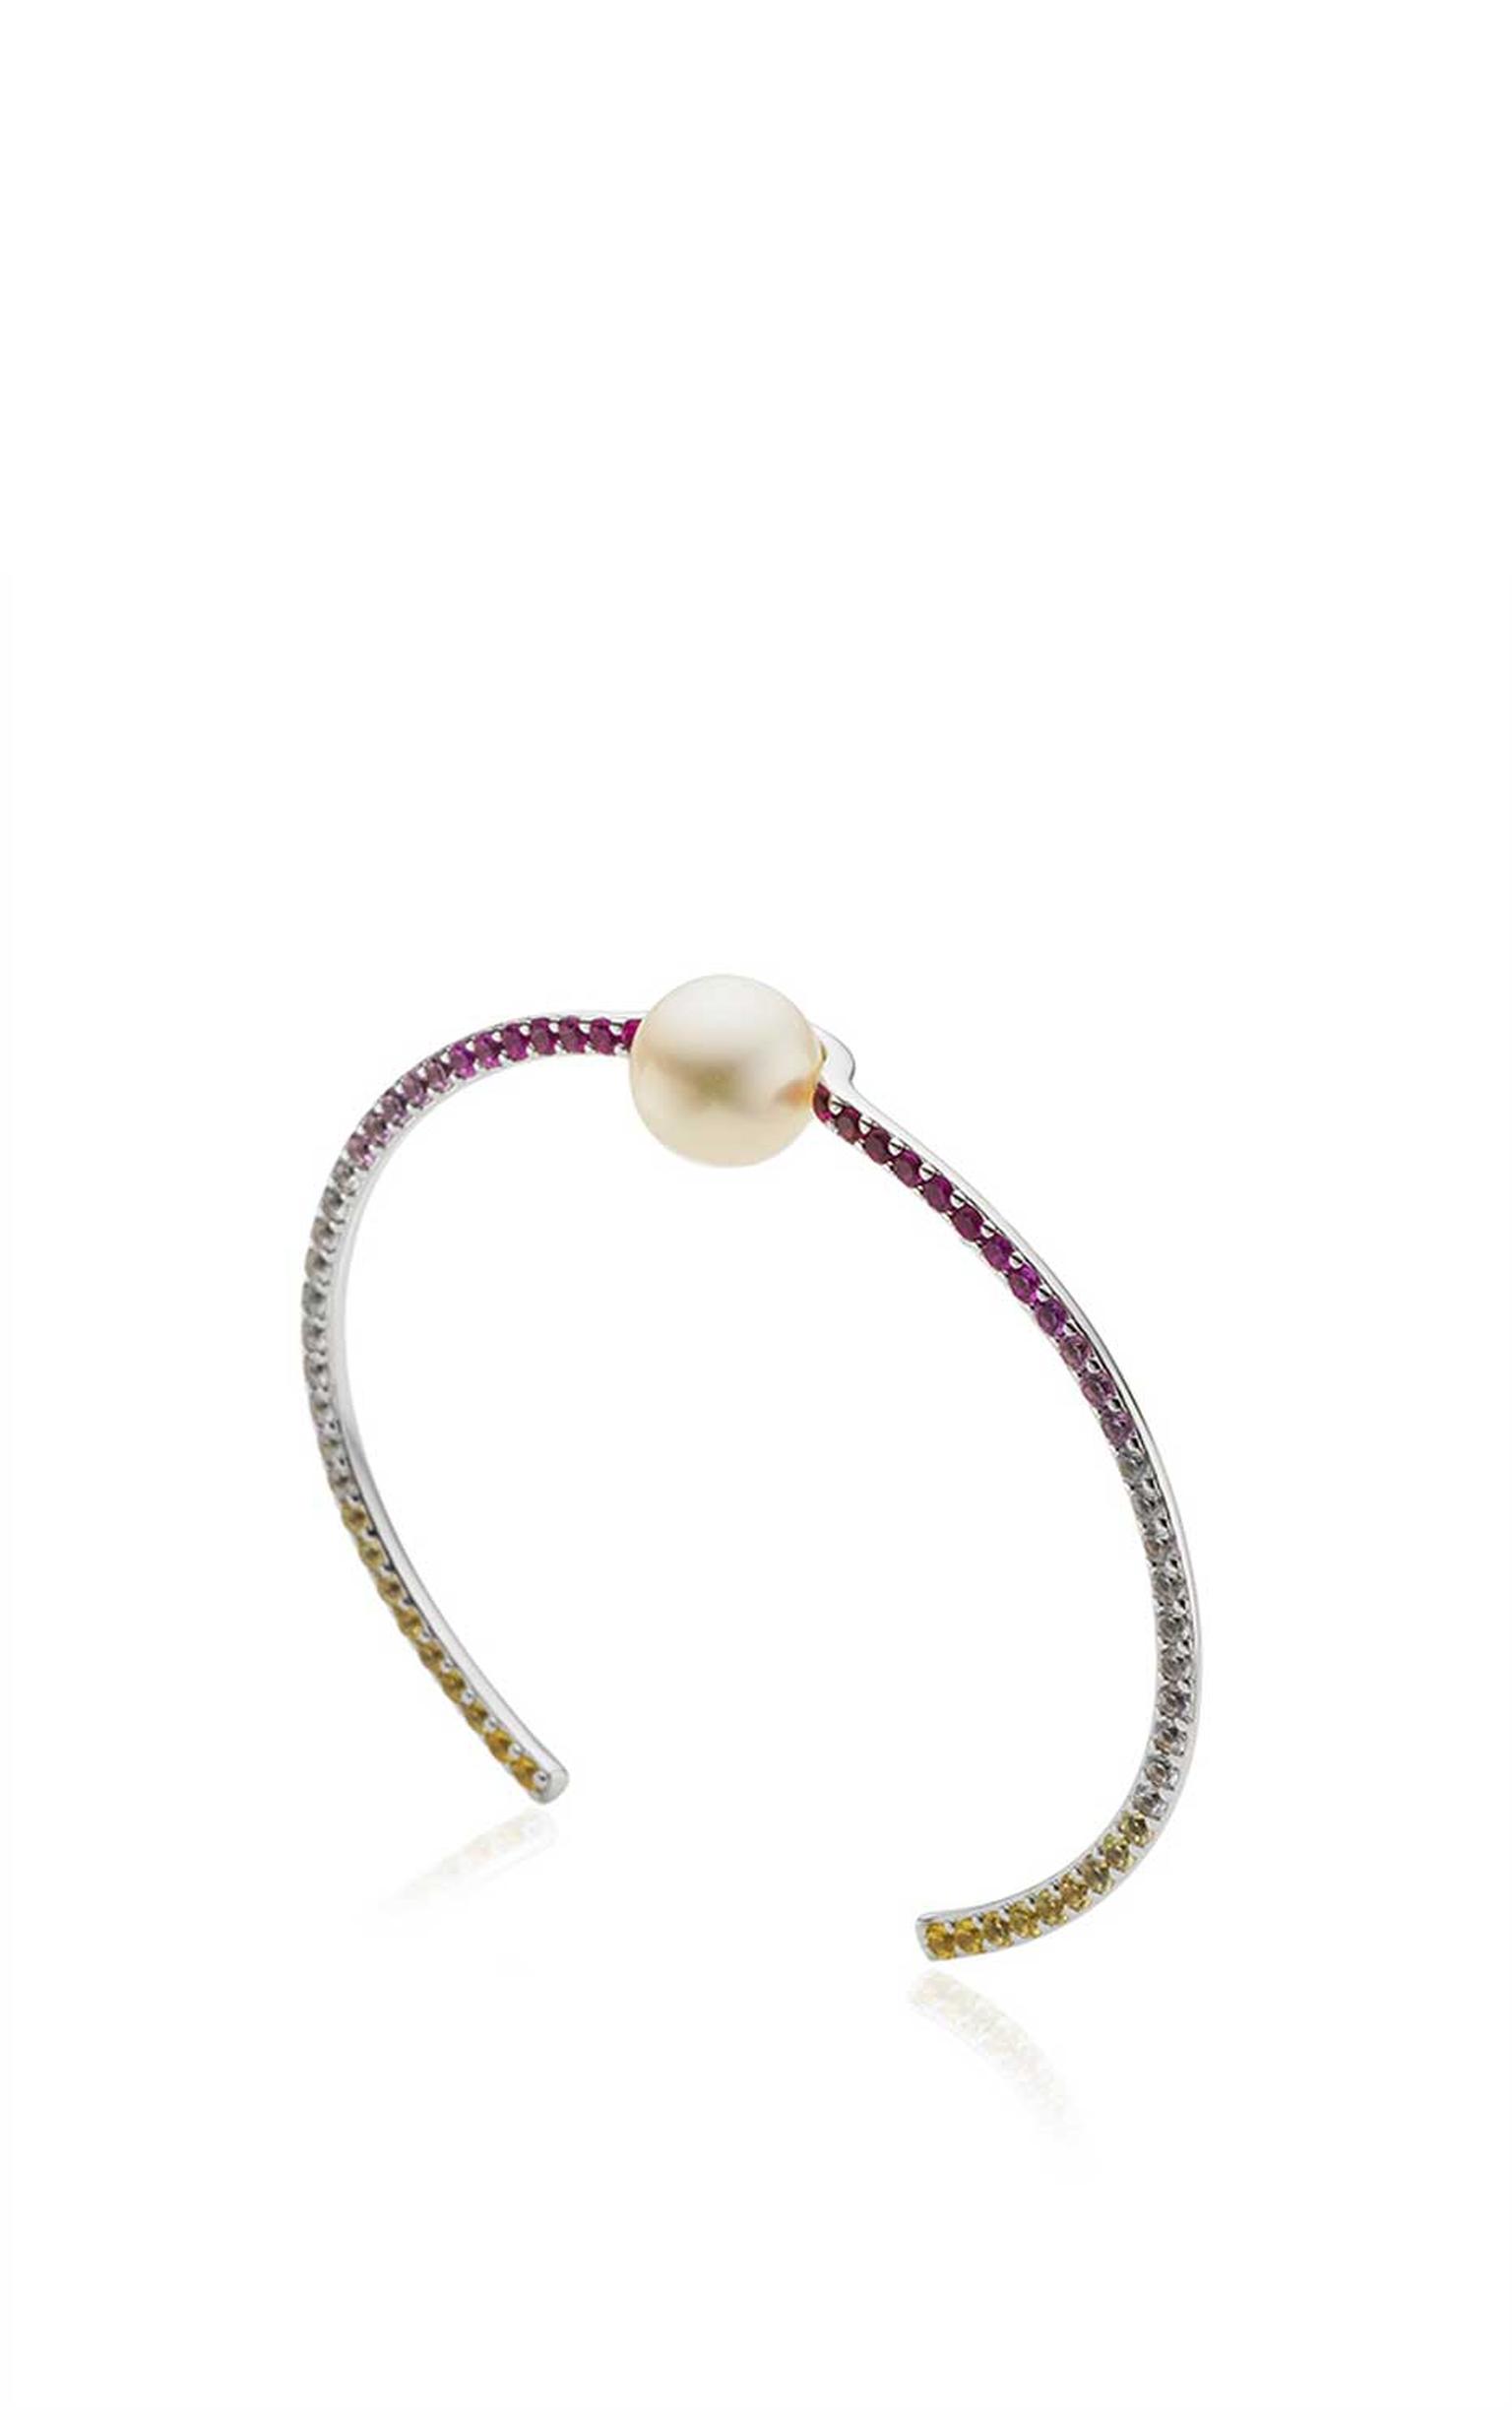 Glow Wrap Bangle in 18ct white gold with sapphires and 10mm white fresh water pearl from the Melanie Georgacopoulos Glow collection.